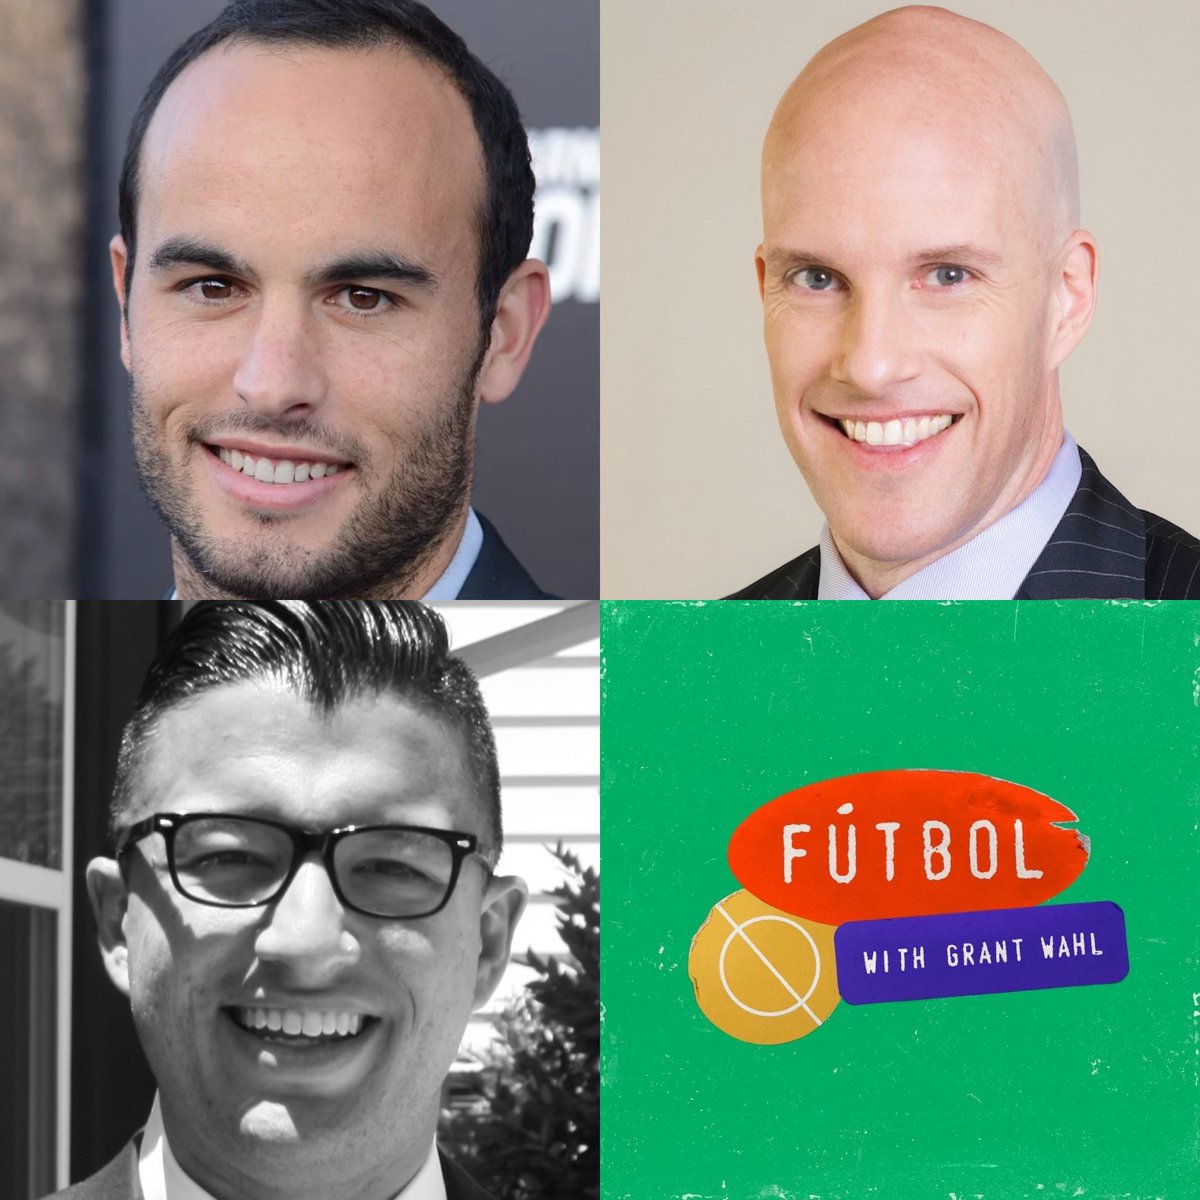 NEW POD: @landondonovan & @ChrisWittyngham join me to break down all the big talking points from the USMNT's 4-1 win at Honduras in World Cup qualifying. Pepi, Berhalter, Adams, McKennie, Pulisic, more. SUBSCRIBE Apple podcasts.apple.com/us/podcast/f%C… Spotify open.spotify.com/show/4HyXyB8ax…